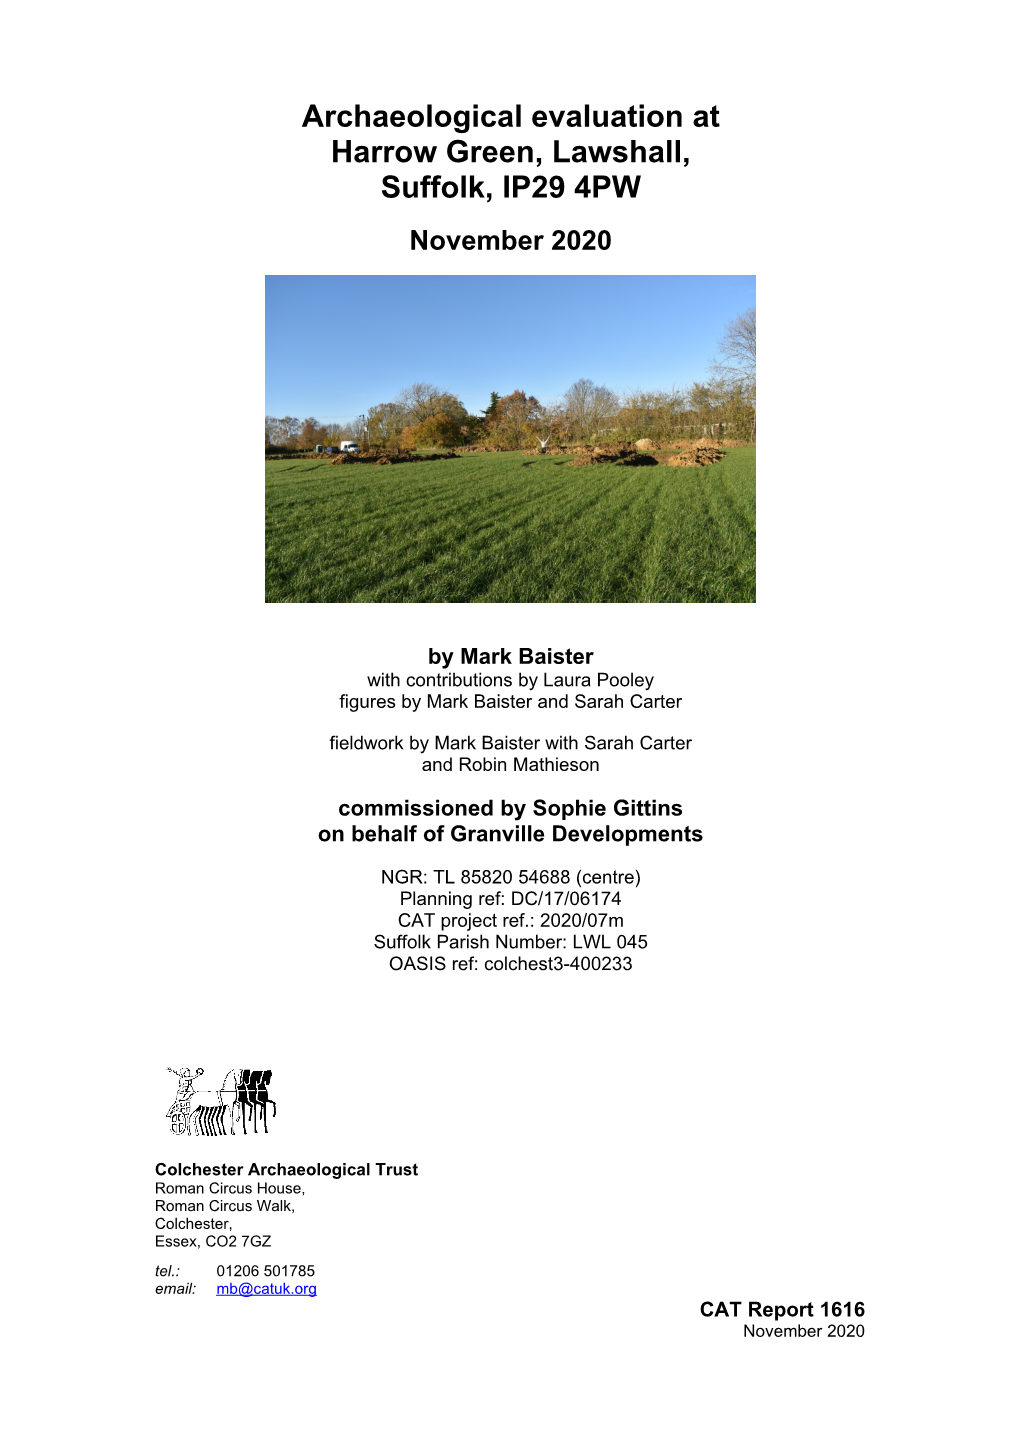 Archaeological Evaluation at Harrow Green, Lawshall, Suffolk, IP29 4PW November 2020